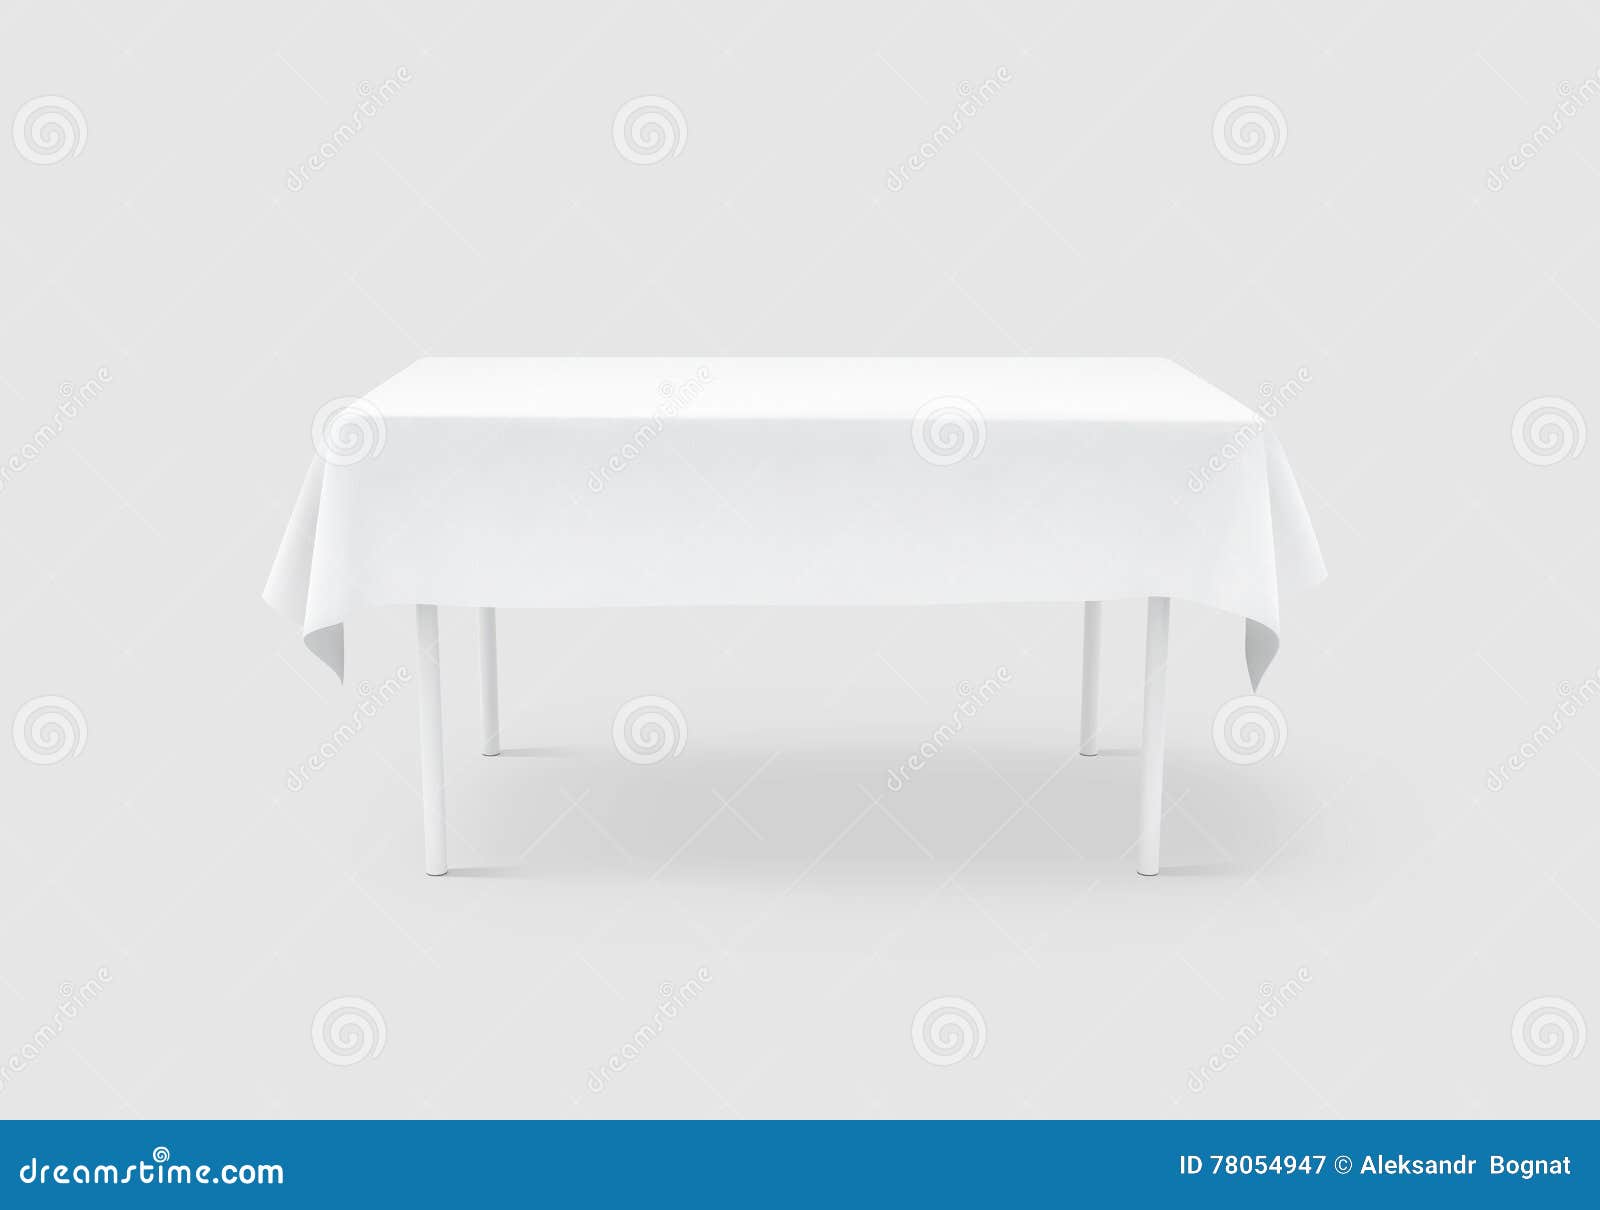 Download Blank White Table Cloth Mock Up Clipping Path Stock Illustration Illustration Of Dinner Decor 78054947